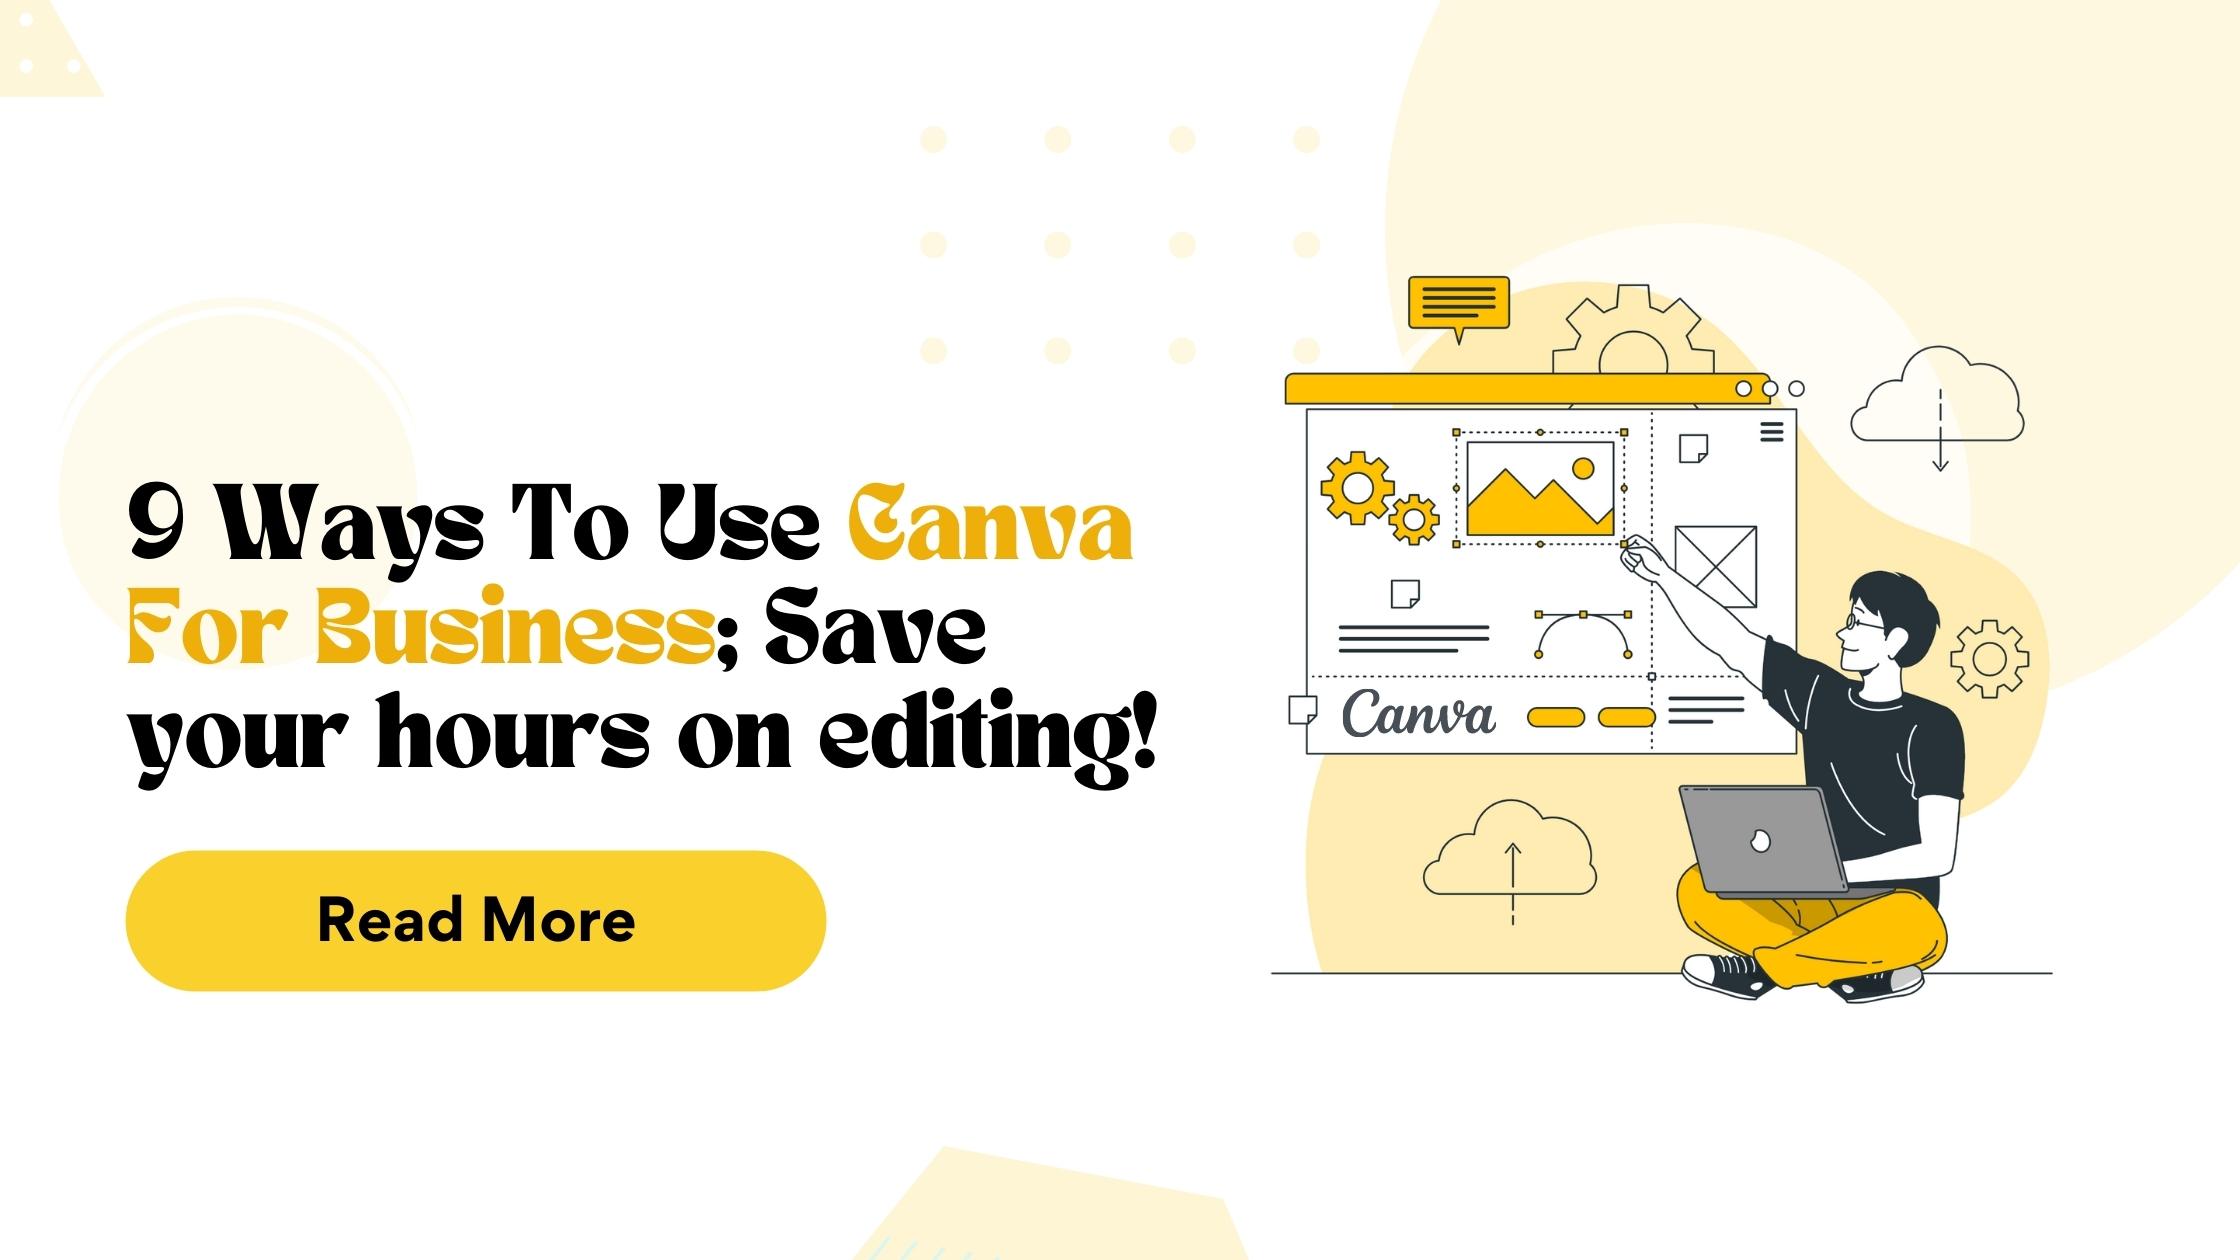 9 Ways To Use Canva For Your Business; Save yourself hours editing!